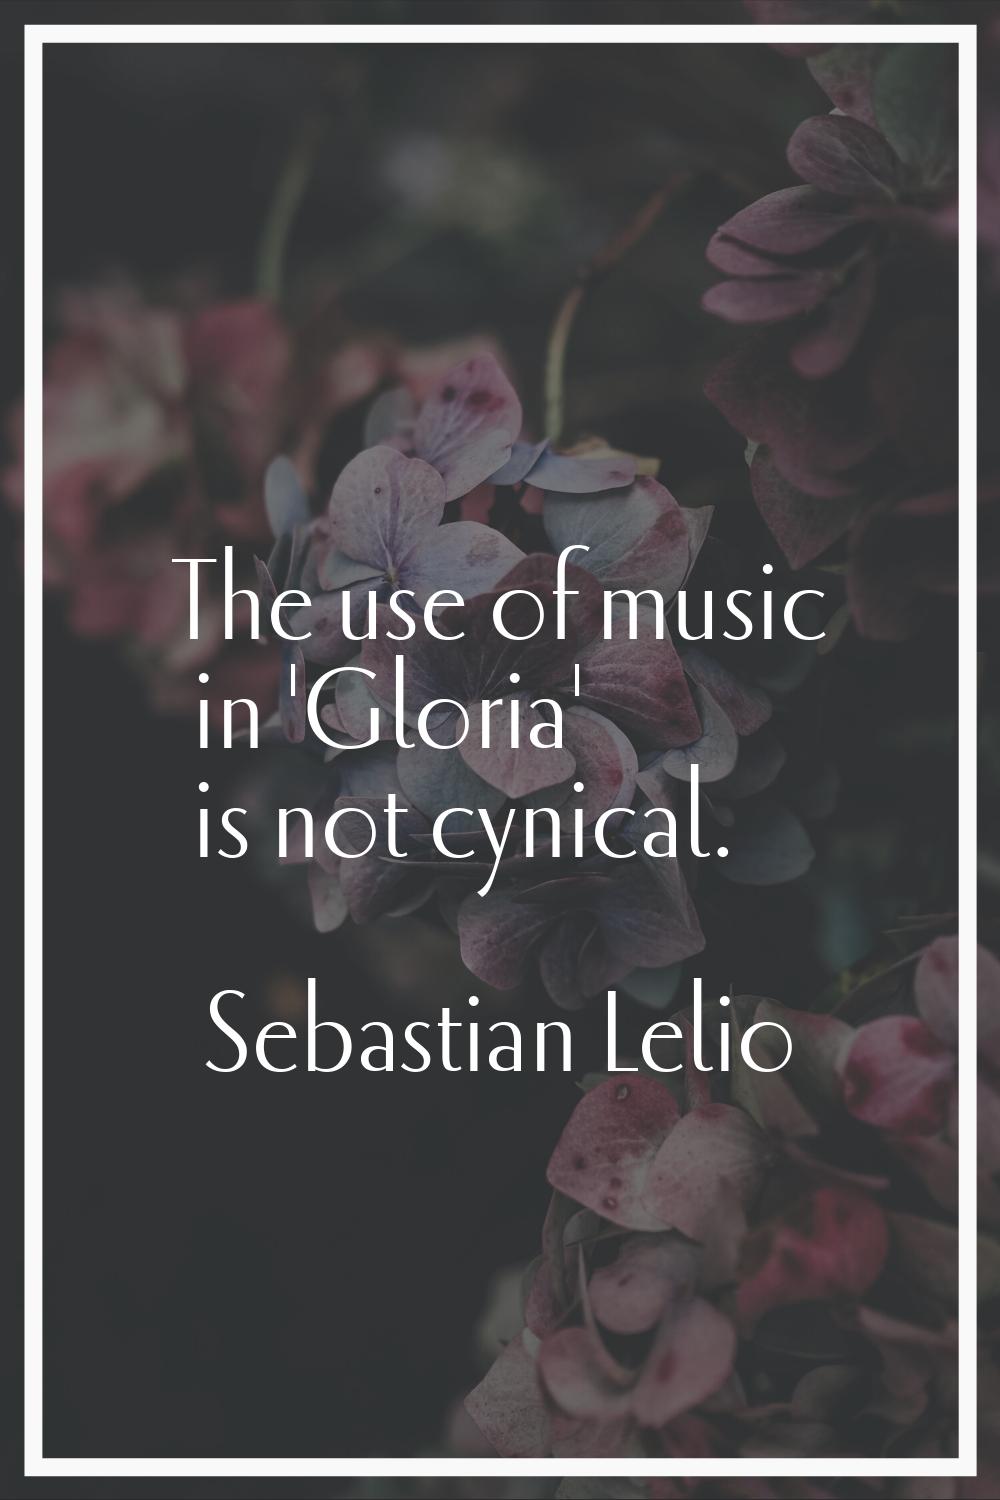 The use of music in 'Gloria' is not cynical.